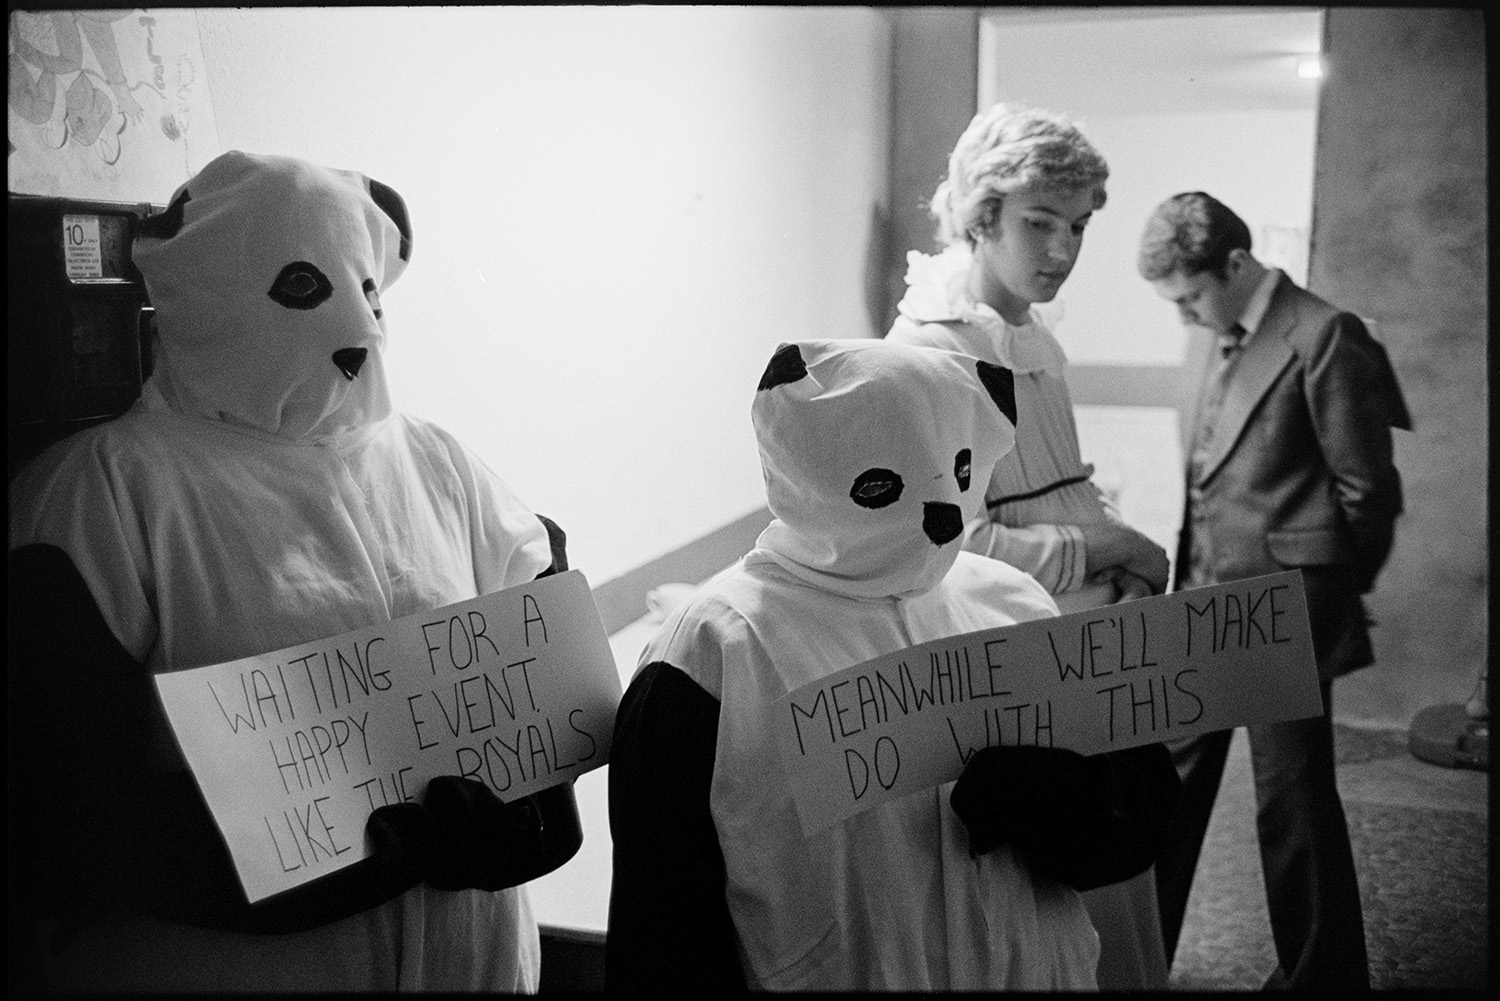 People in fancy dress waiting to go on parade in village hall. 
[Two people dressed as pandas for a fancy dress parade in Northlew Village Hall for Northlew Carnival. They are each holding a placard which reads 'Waiting For A Happy Event Like The Royals' and 'Meanwhile We'll Make Do With This'.]